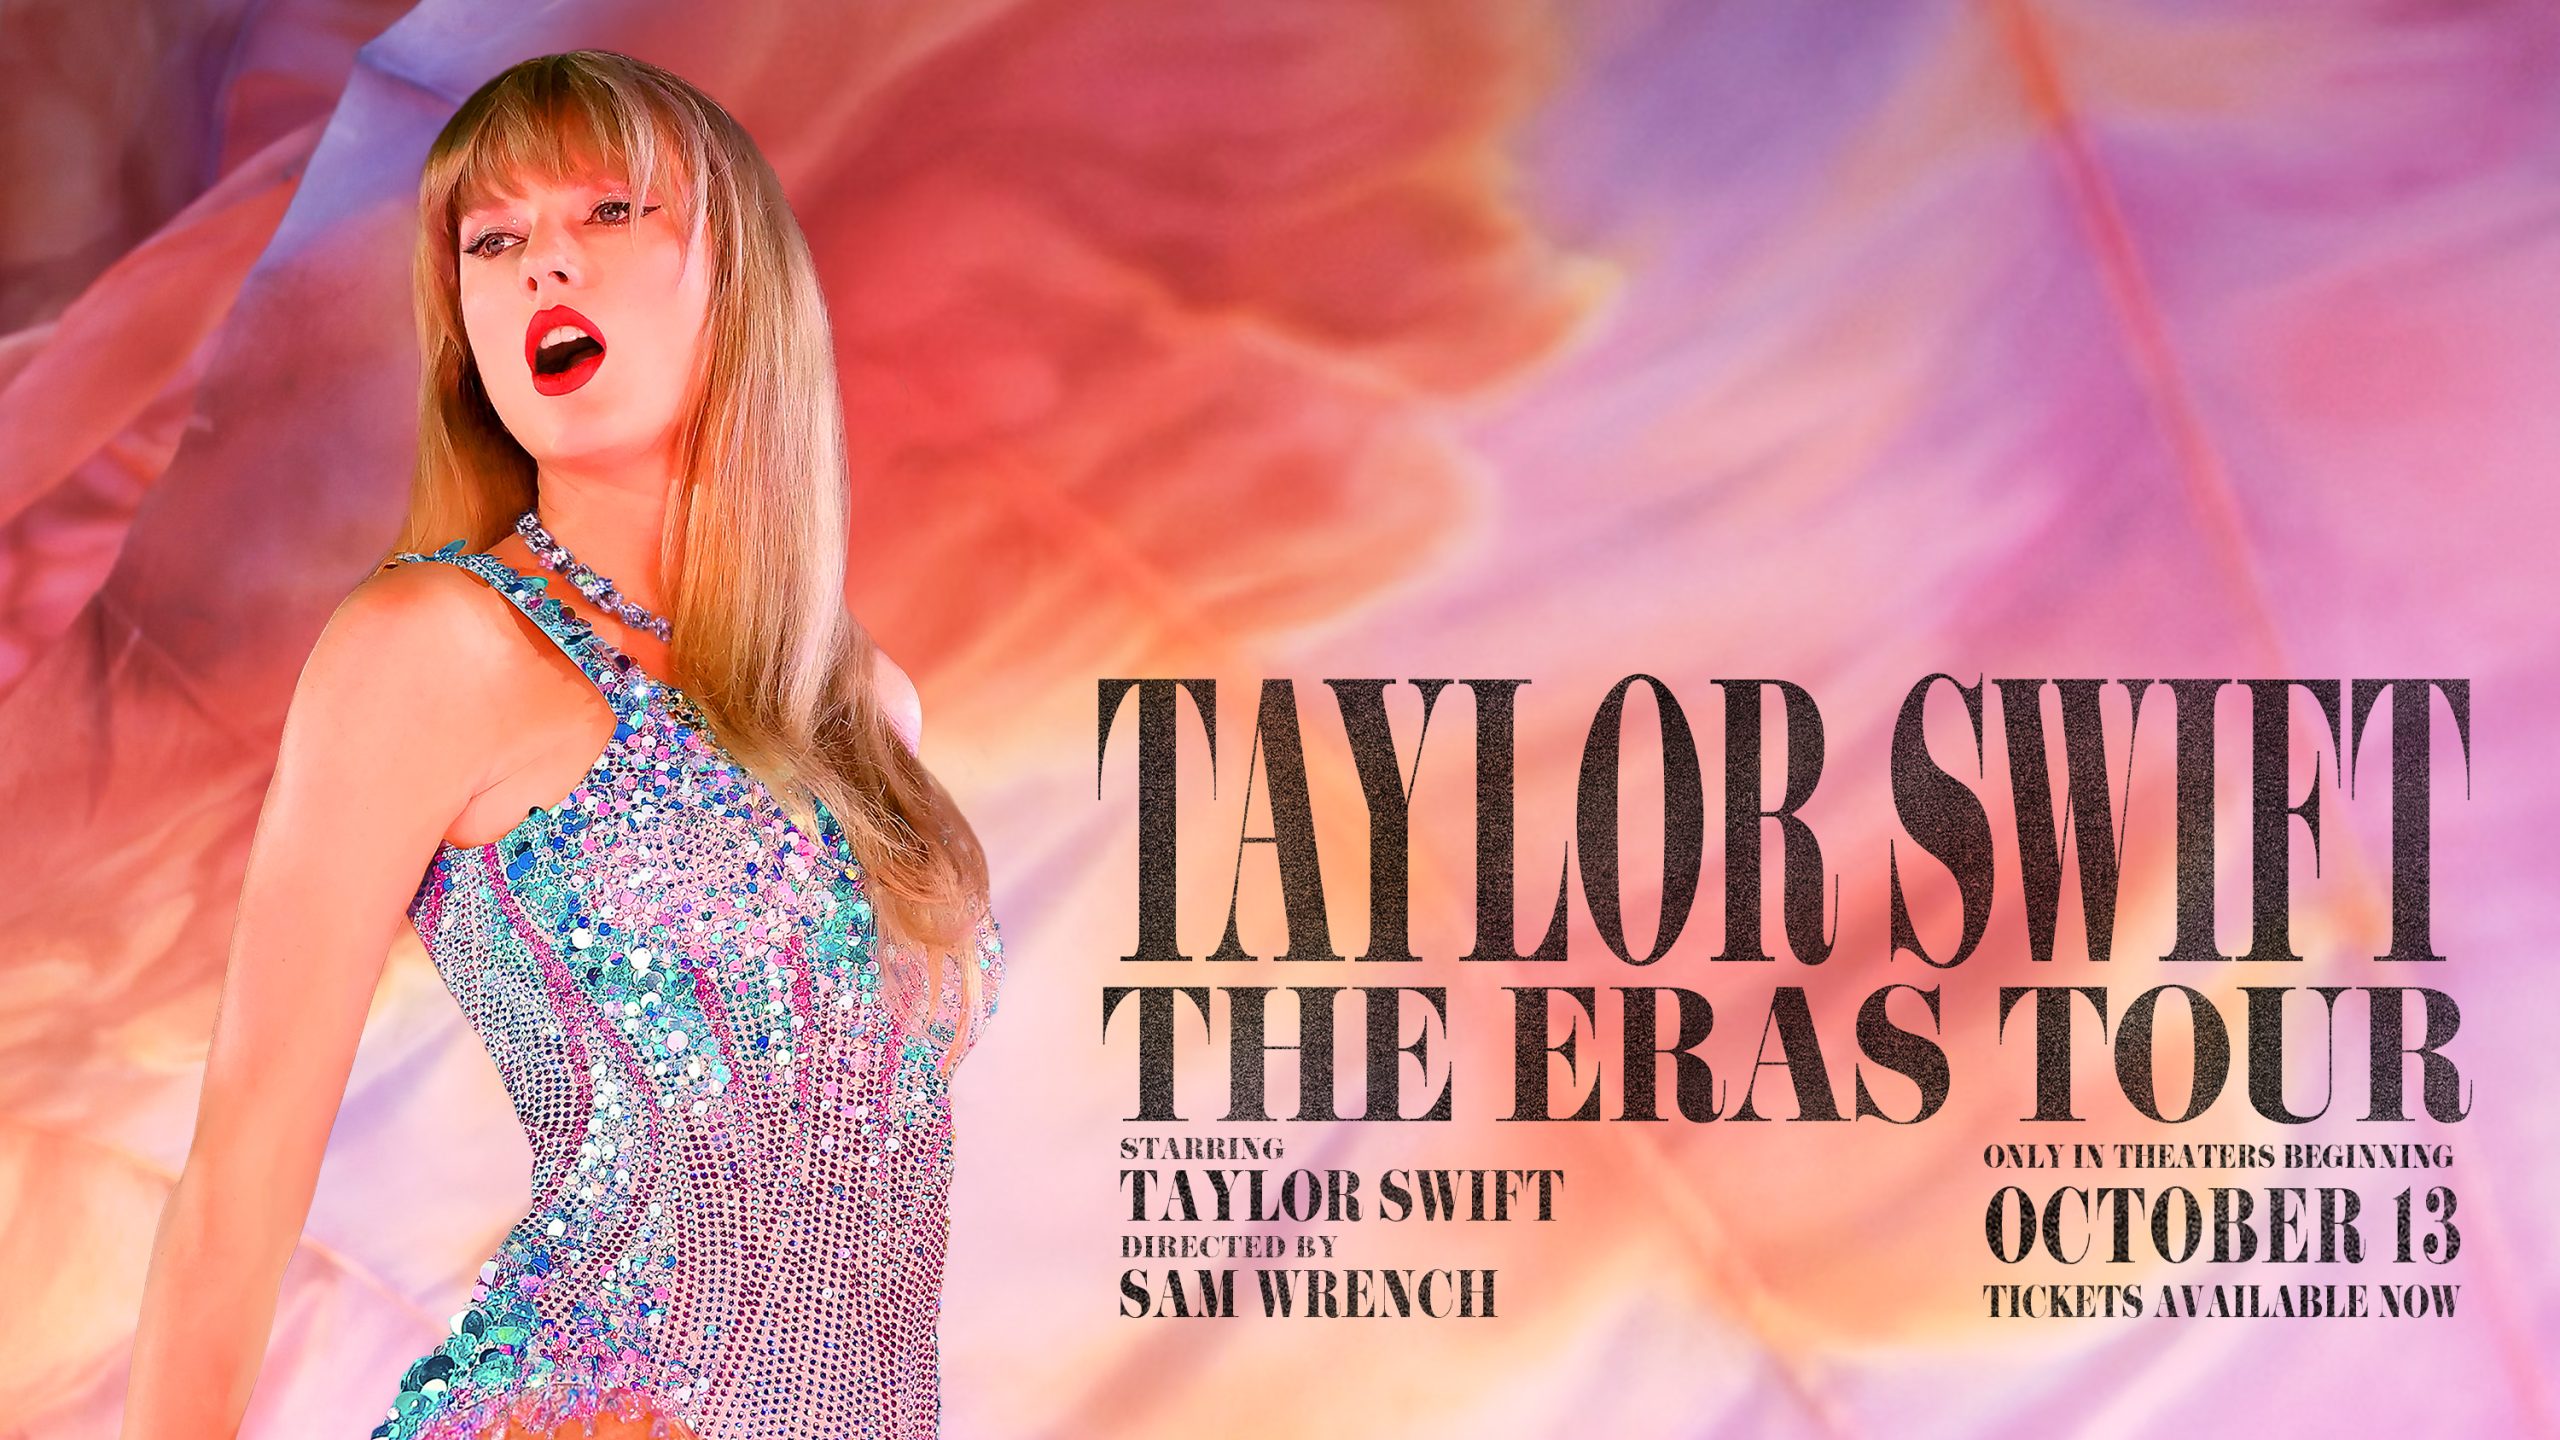 TAYLOR SWIFT THE ERAS TOUR » The Colonial Theatre